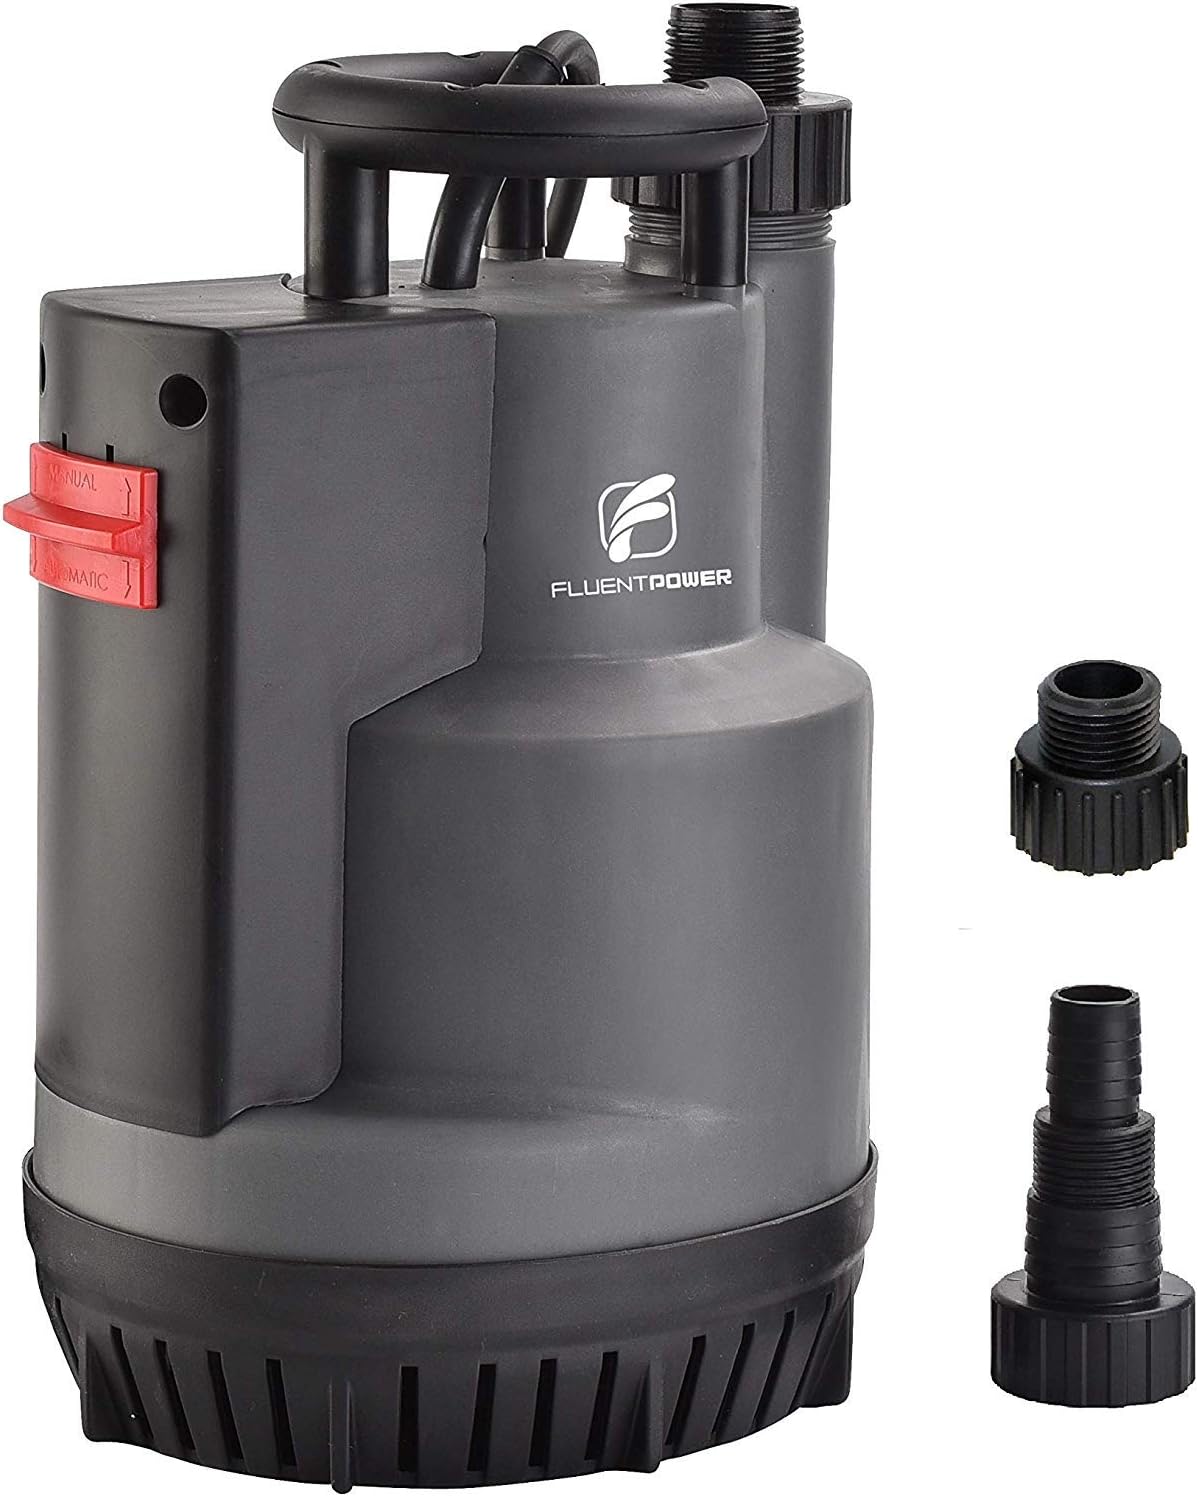 FLUENTPOWER 1/2HP Sump Pump 2500GPH Submersible Utility Pump, Automatic or Continuous Manual Operation by Integrated Float Switch, Drain Cl